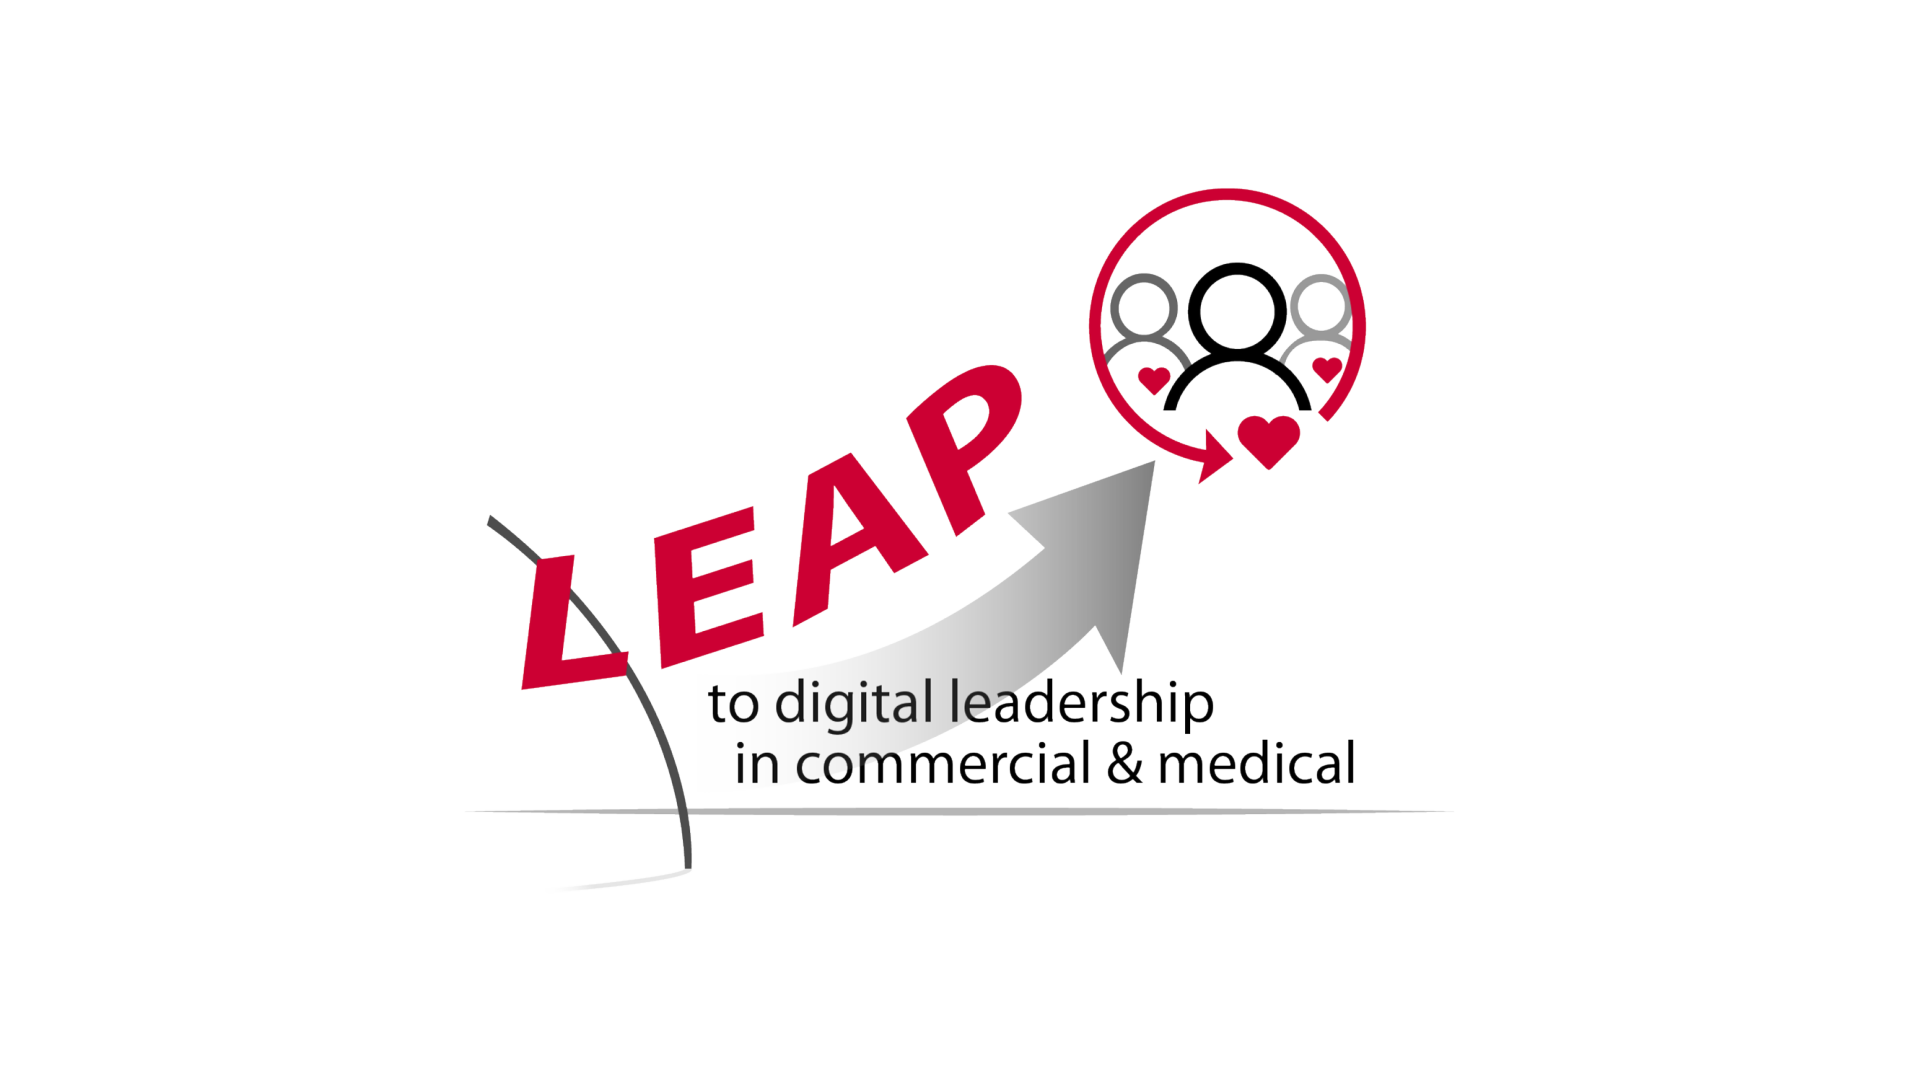 Leadership to digital leadership in commercial and medical